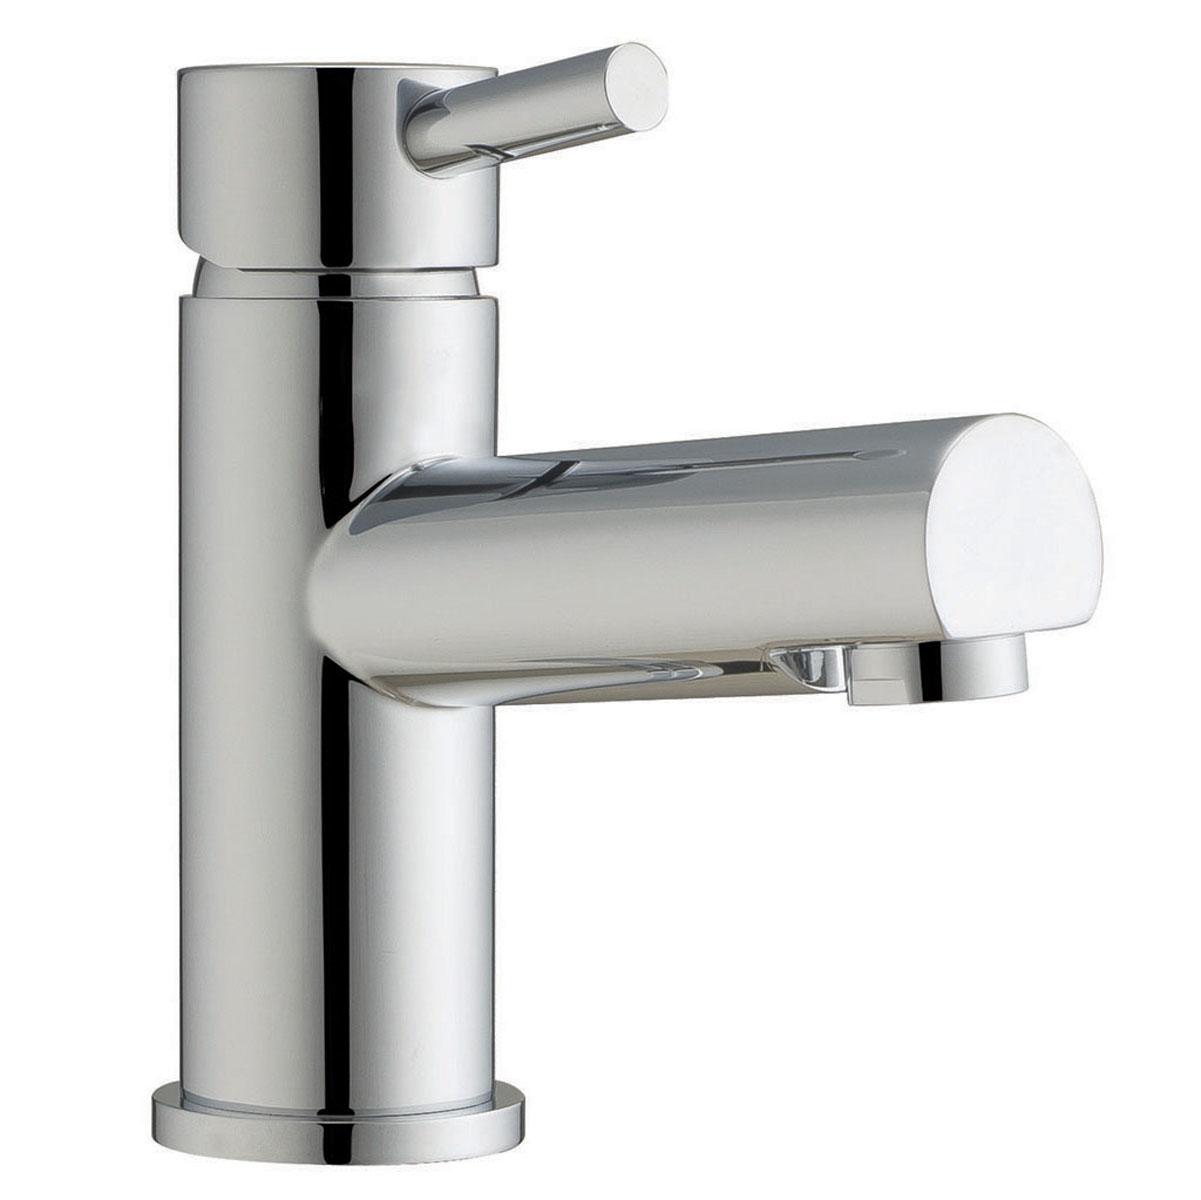 An image of Zico Single Lever Monobloc Basin Mixer With Popup Waste - Chrome